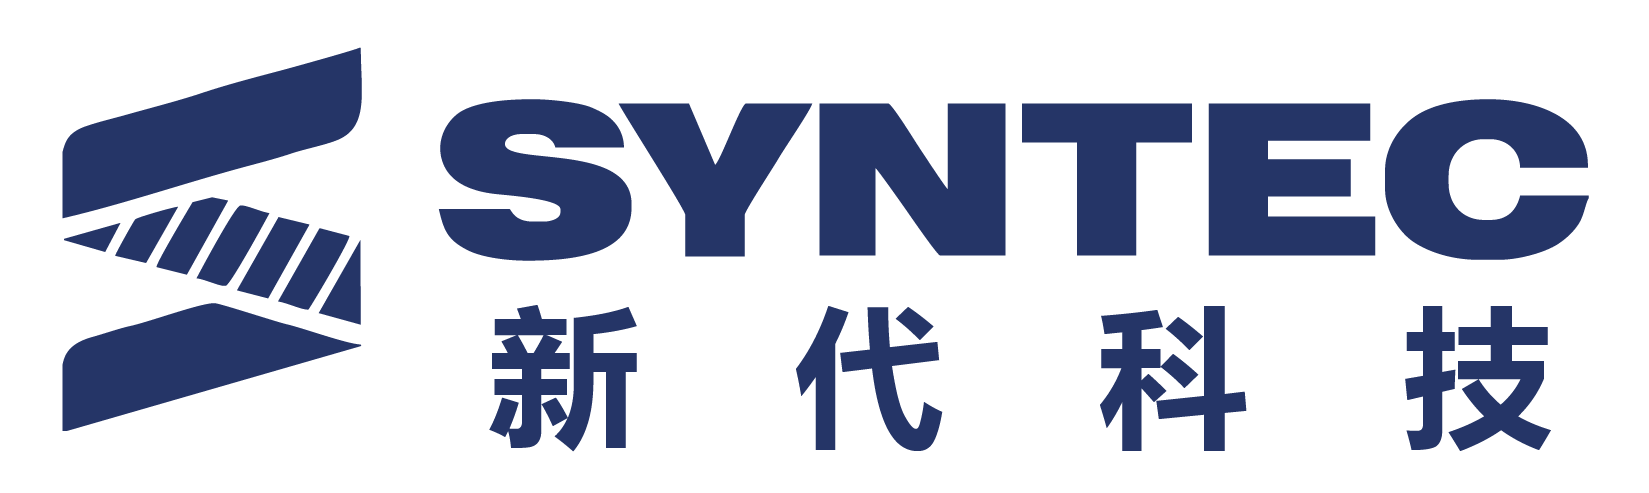 About|SYNTEC TECHNOLOGY CO., LTD.